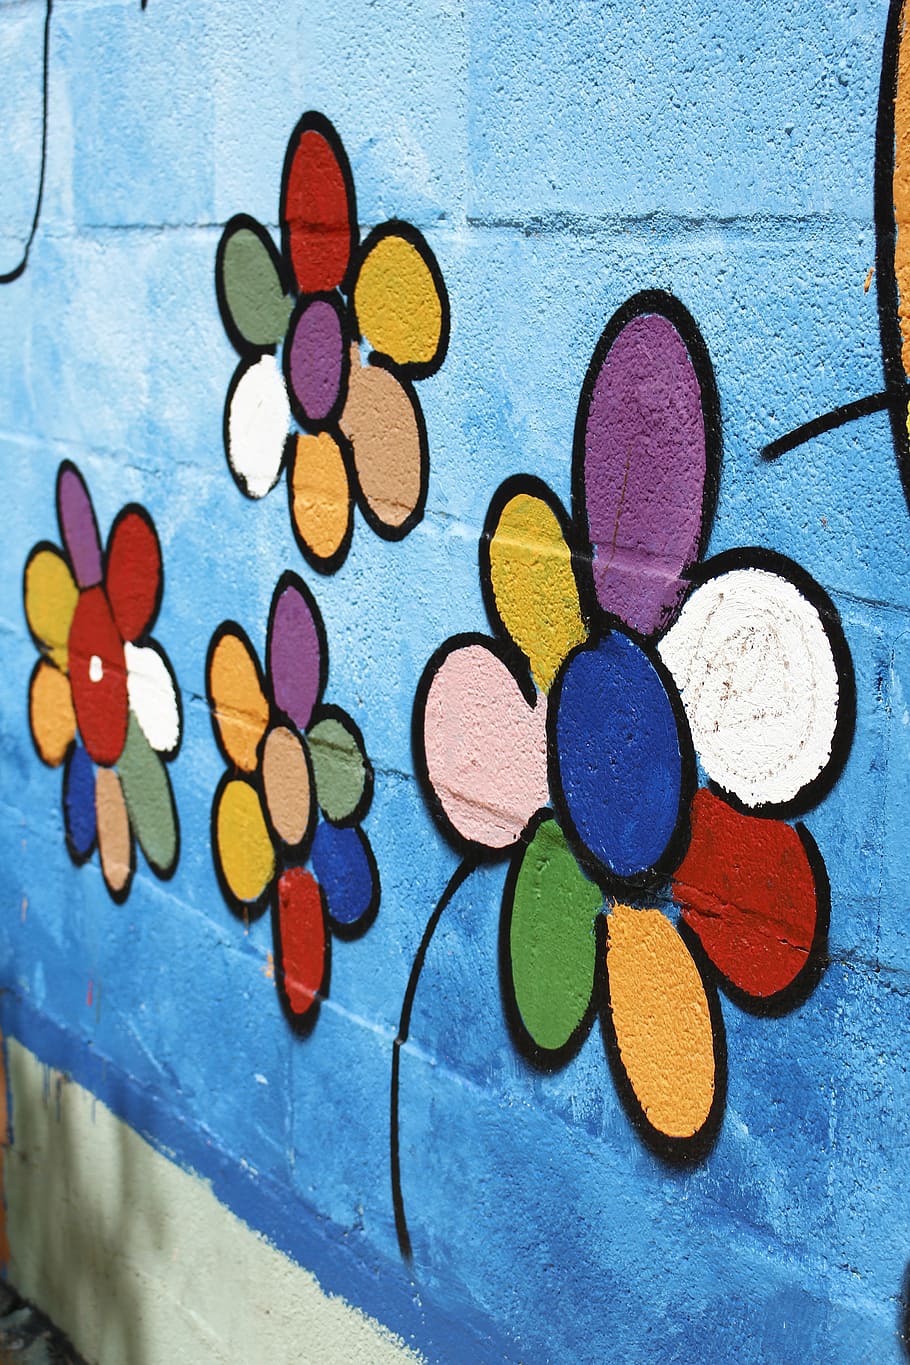 wall, flowers, creative, spray, city, beautify, multi colored, art and craft, creativity, close-up